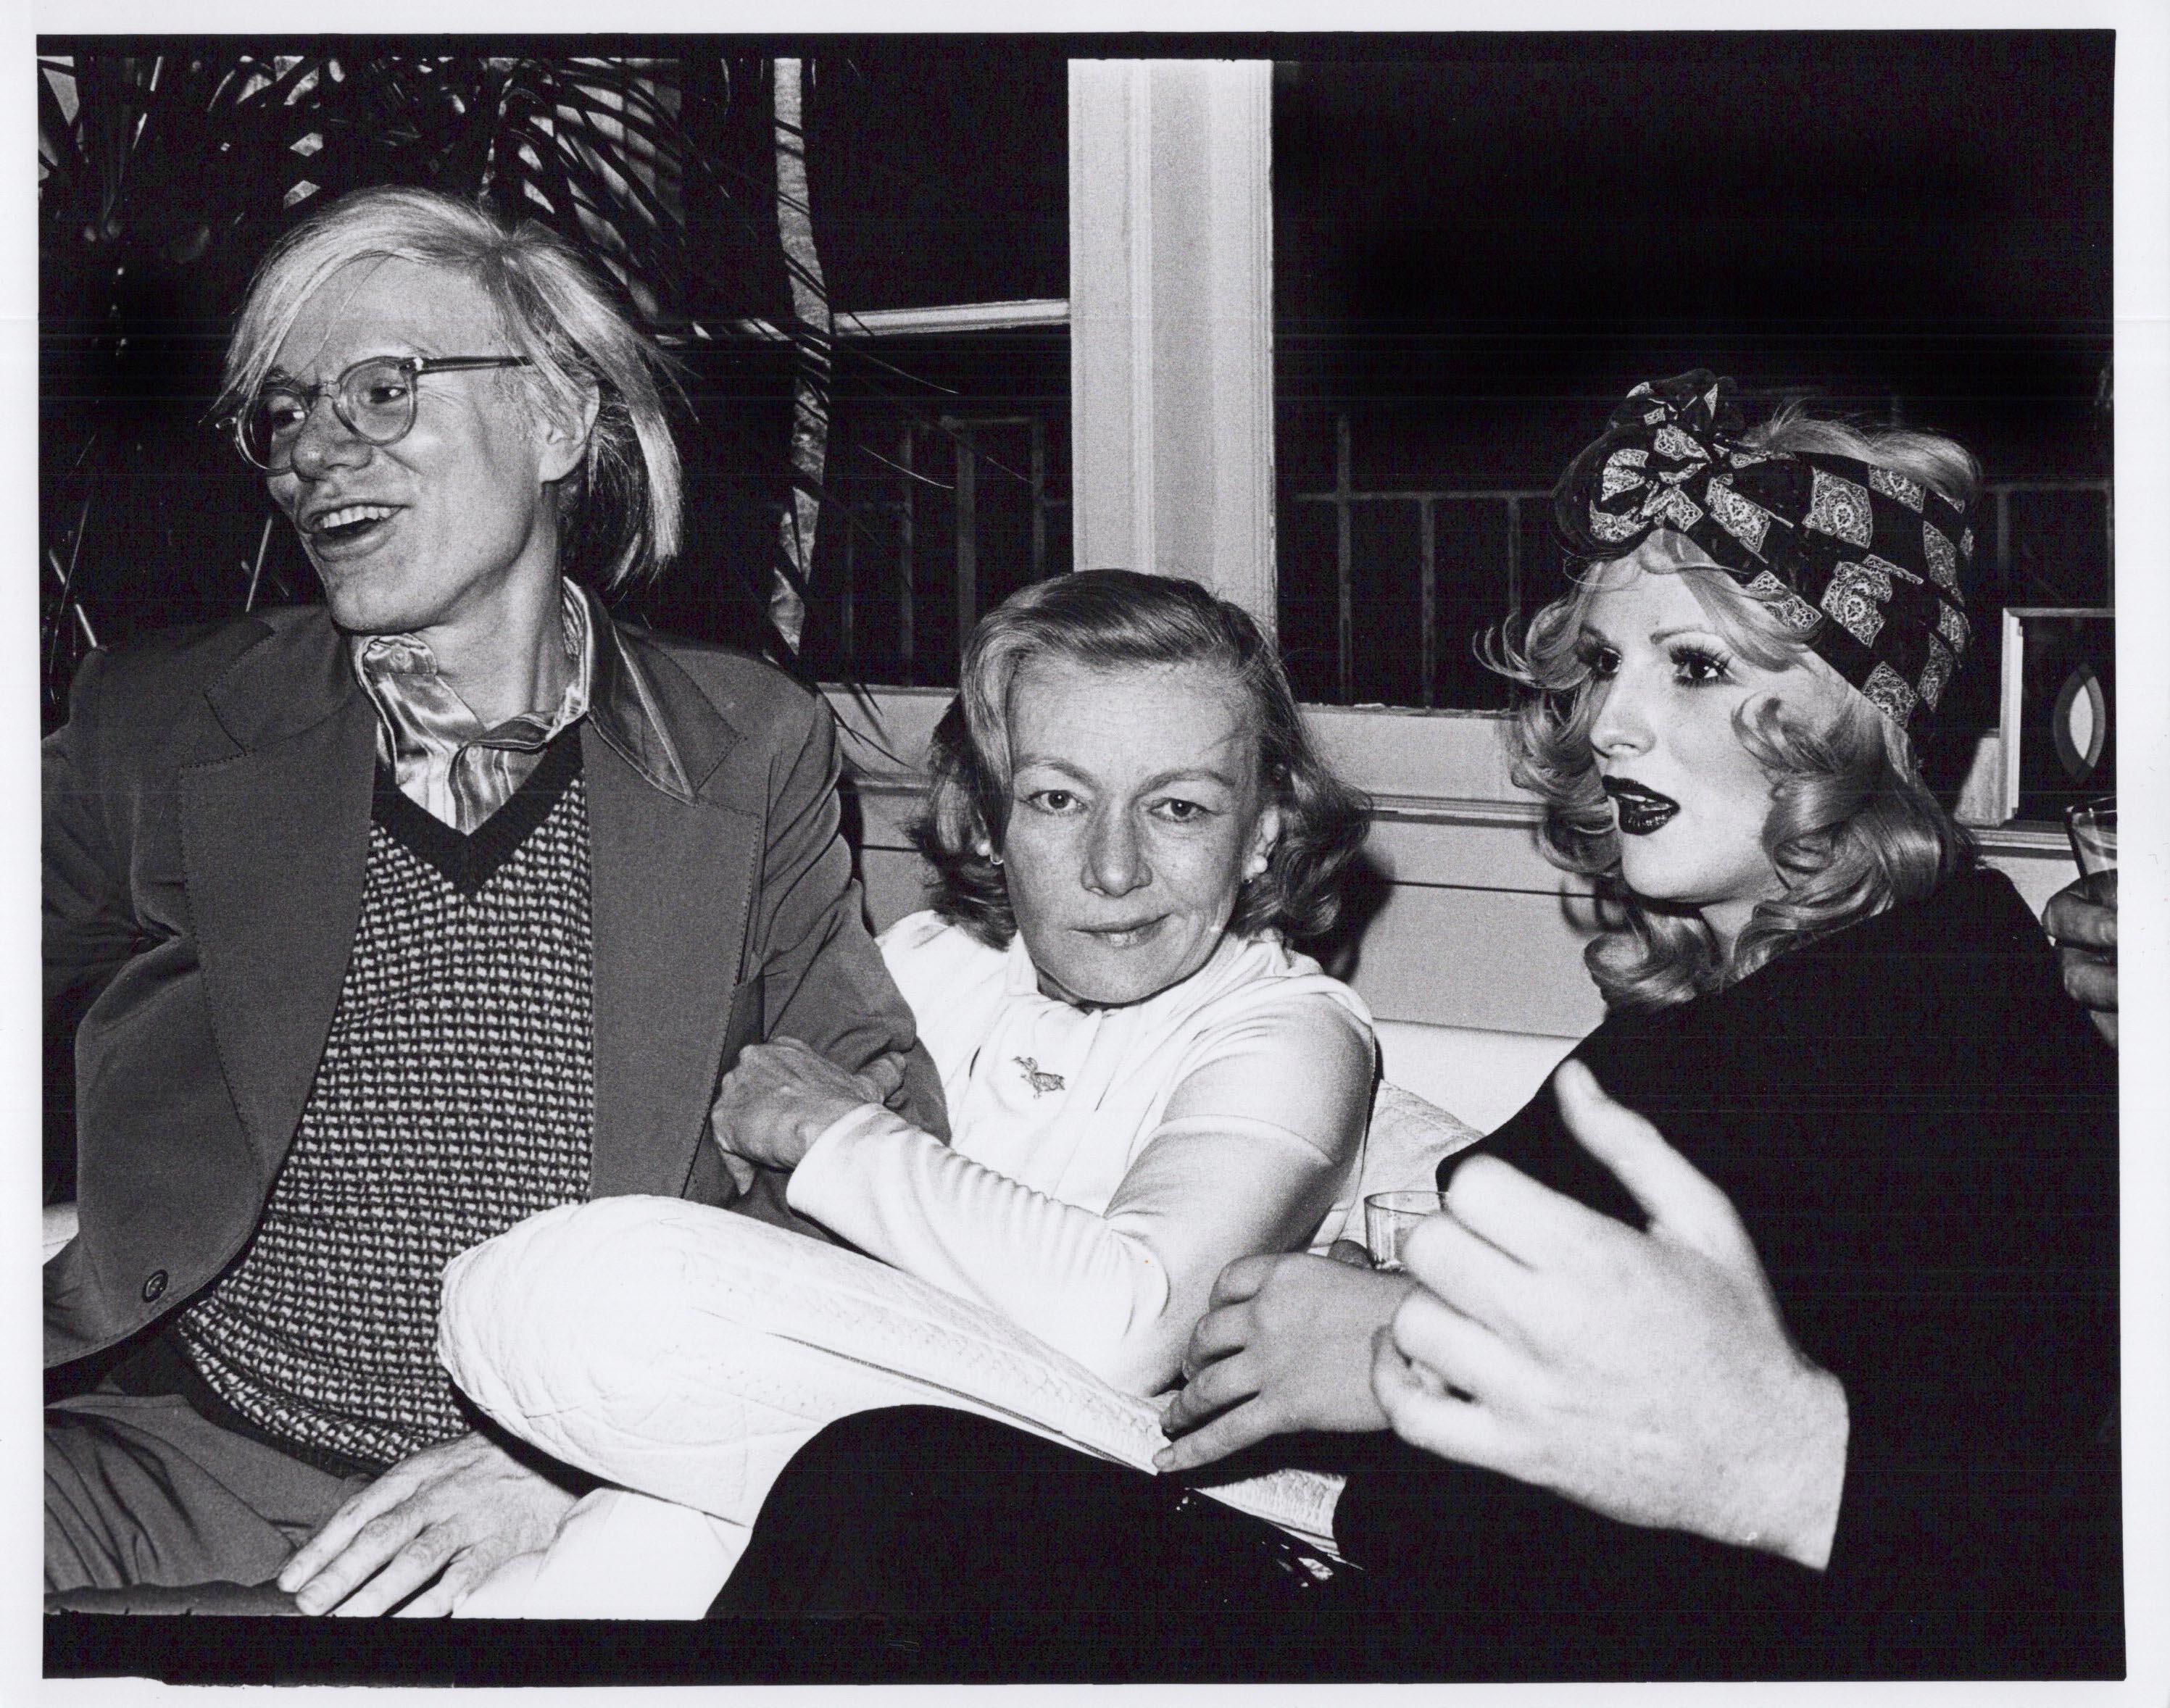 Jack Mitchell Black and White Photograph - Film noir actress Veronica Lake at a party with Andy Warhol and Candy Darling